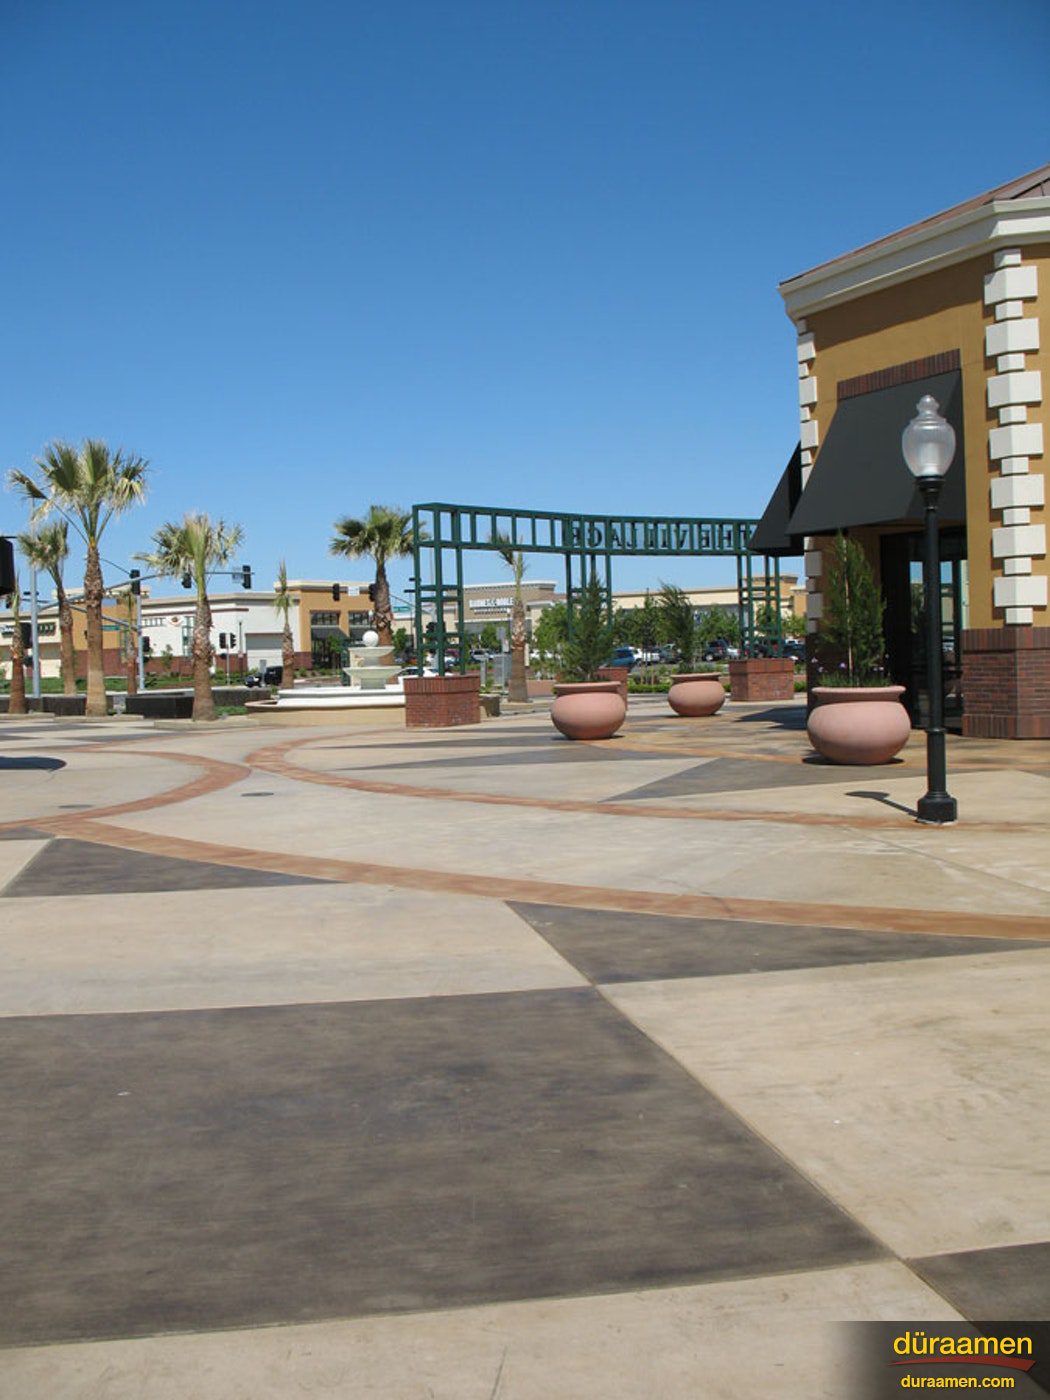 This outdoor lifestyle center features a decorative concrete overlay that was created with Duraamen products Dyes Stains on Walkways in a Retail Center Sacramento CA | Duraamen Engineered Products Inc